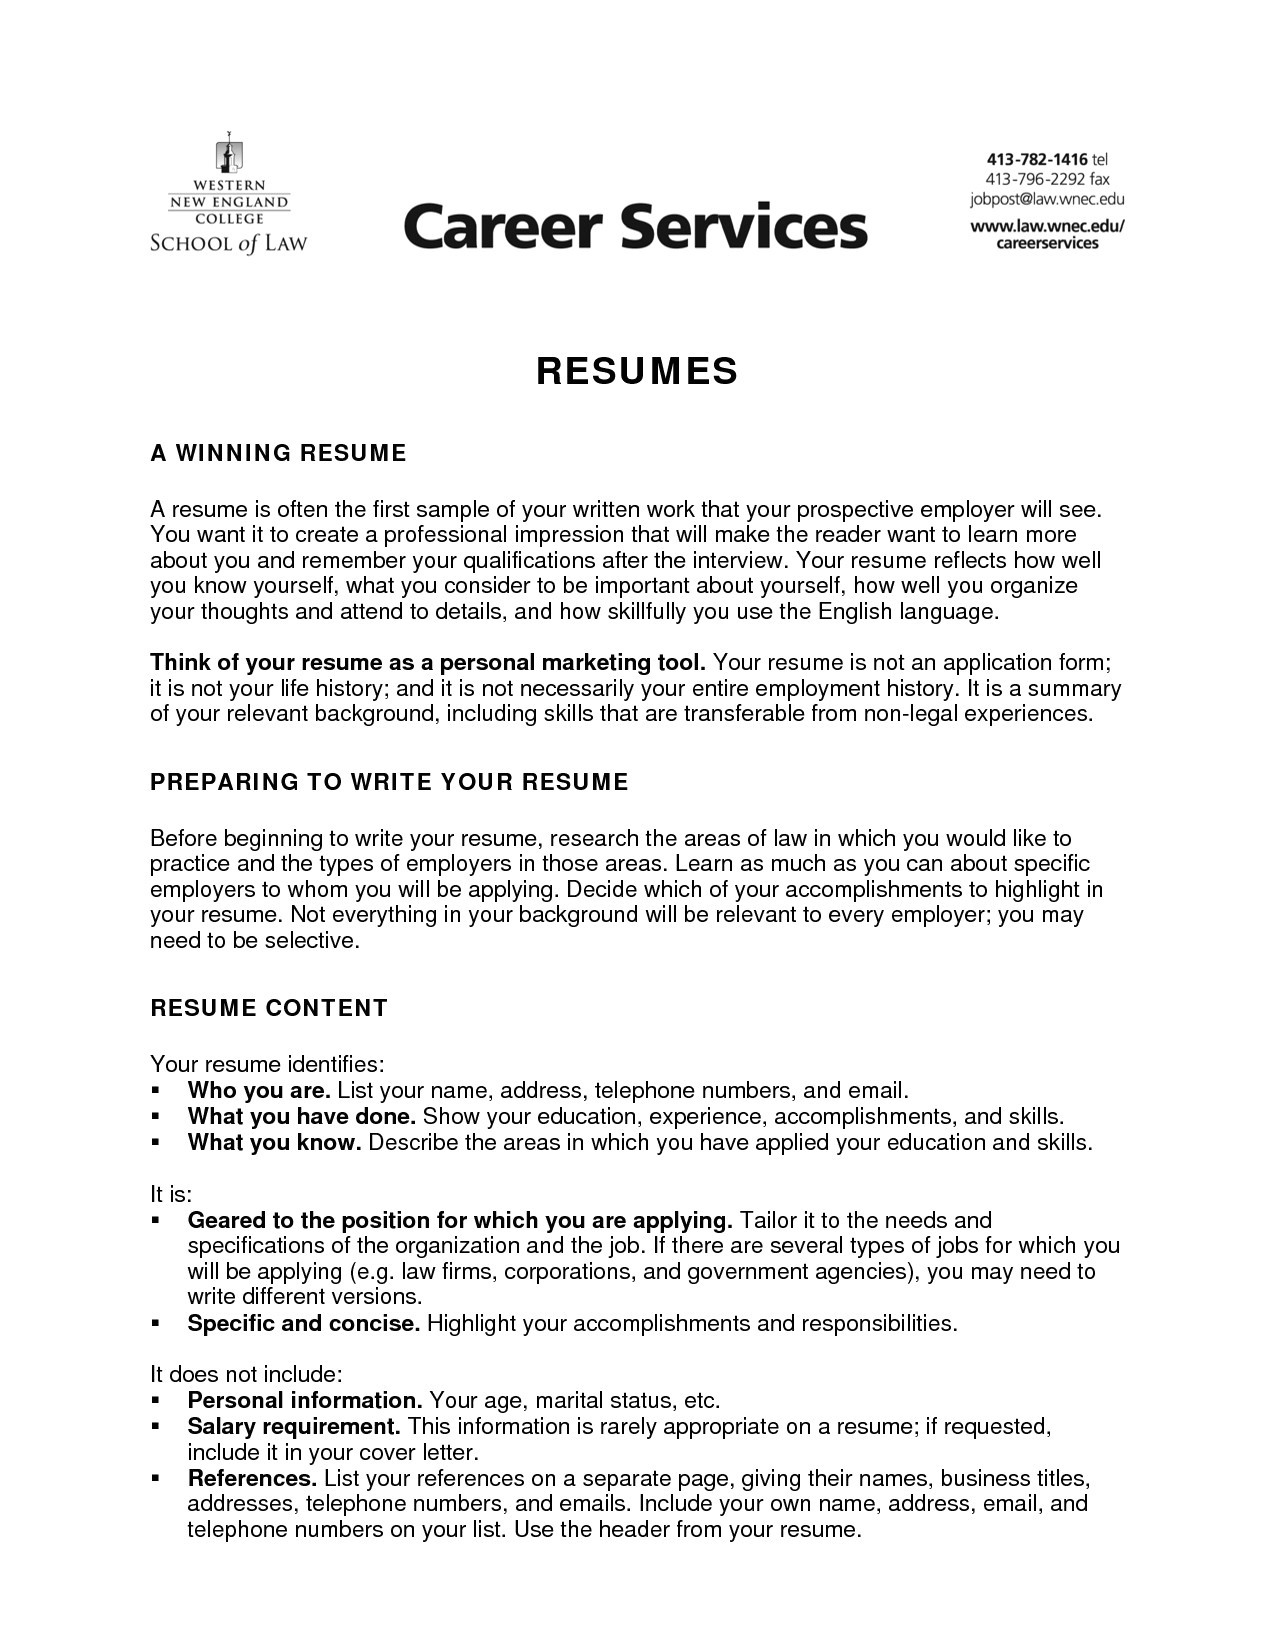 cover letter with salary requirements template